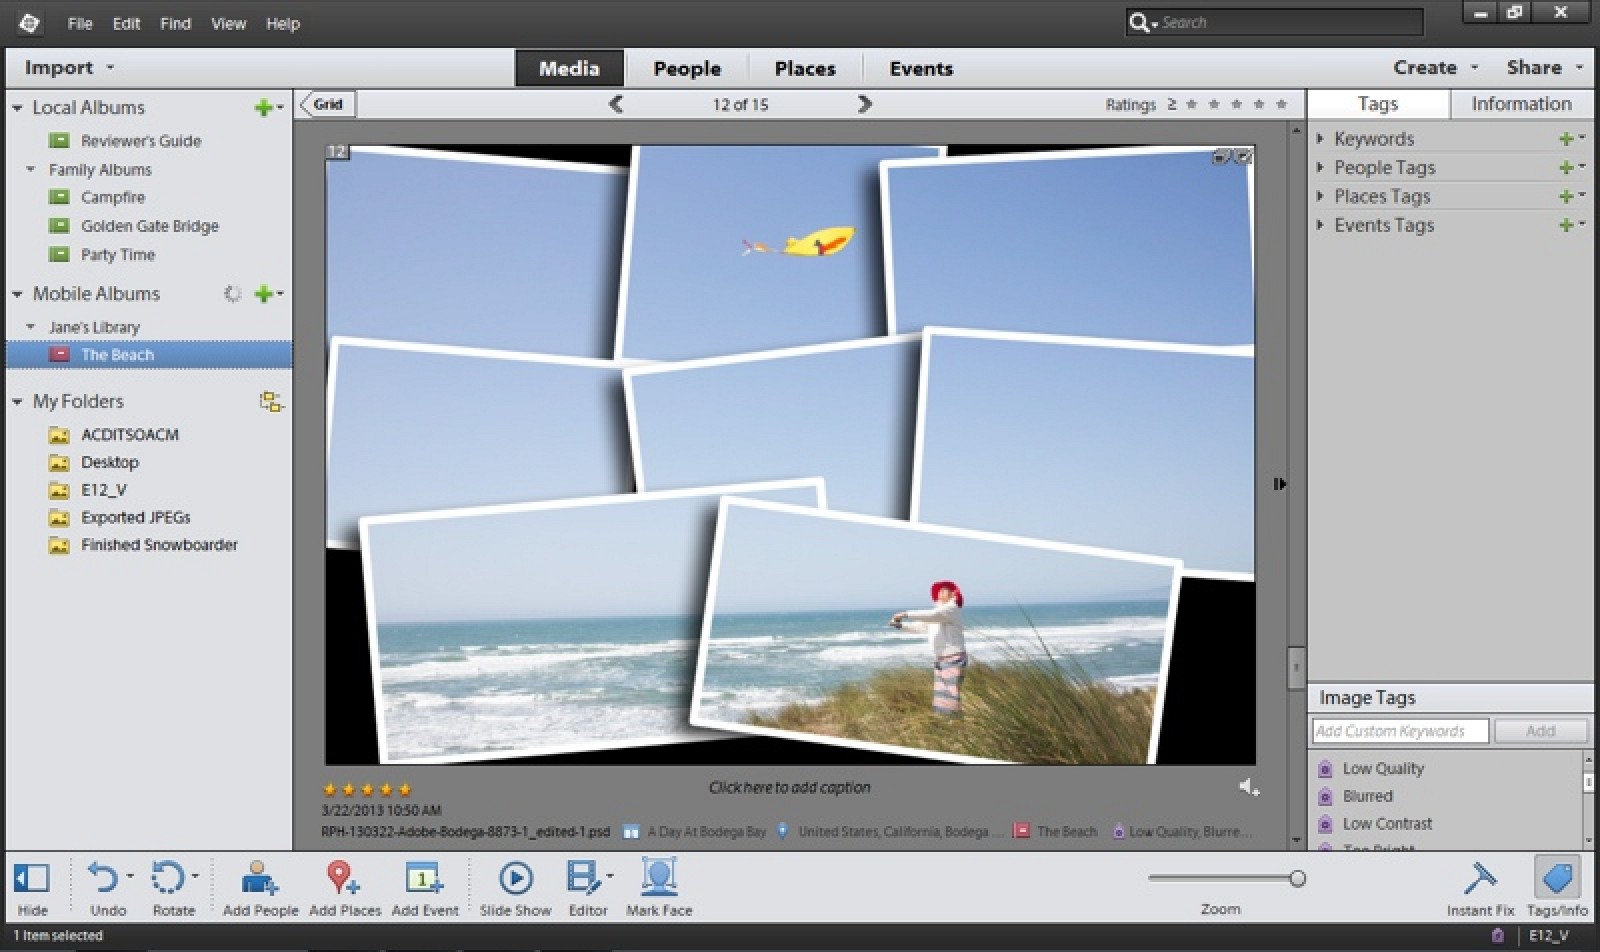 Free Download Adobe Photoshop For Mac Os X 10.6.8